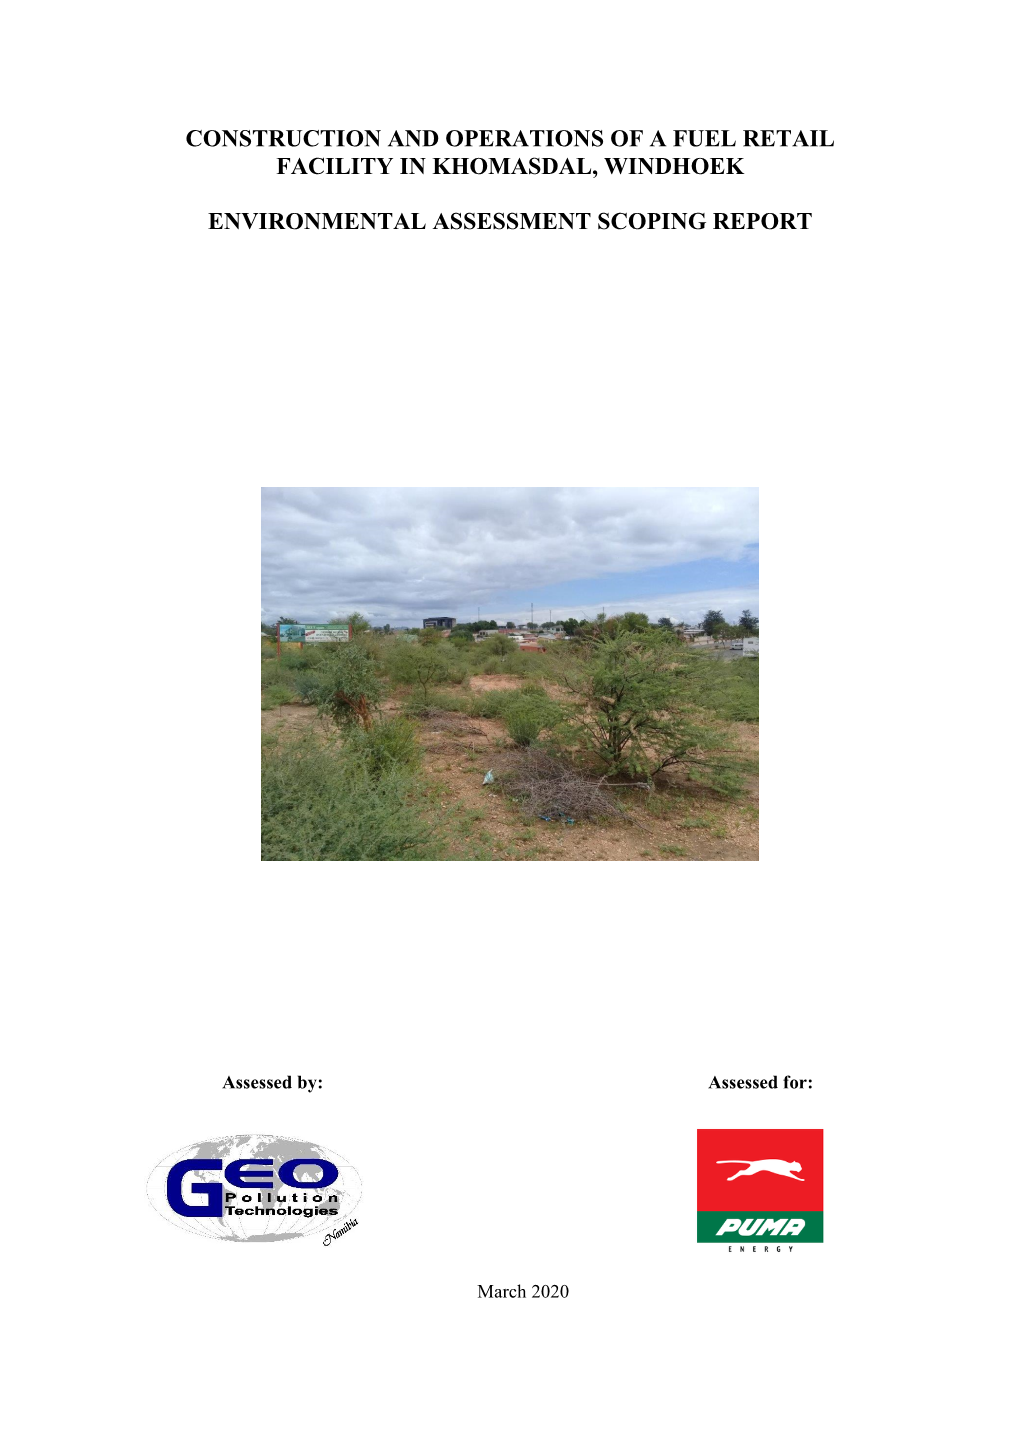 Construction and Operations of a Fuel Retail Facility in Khomasdal, Windhoek